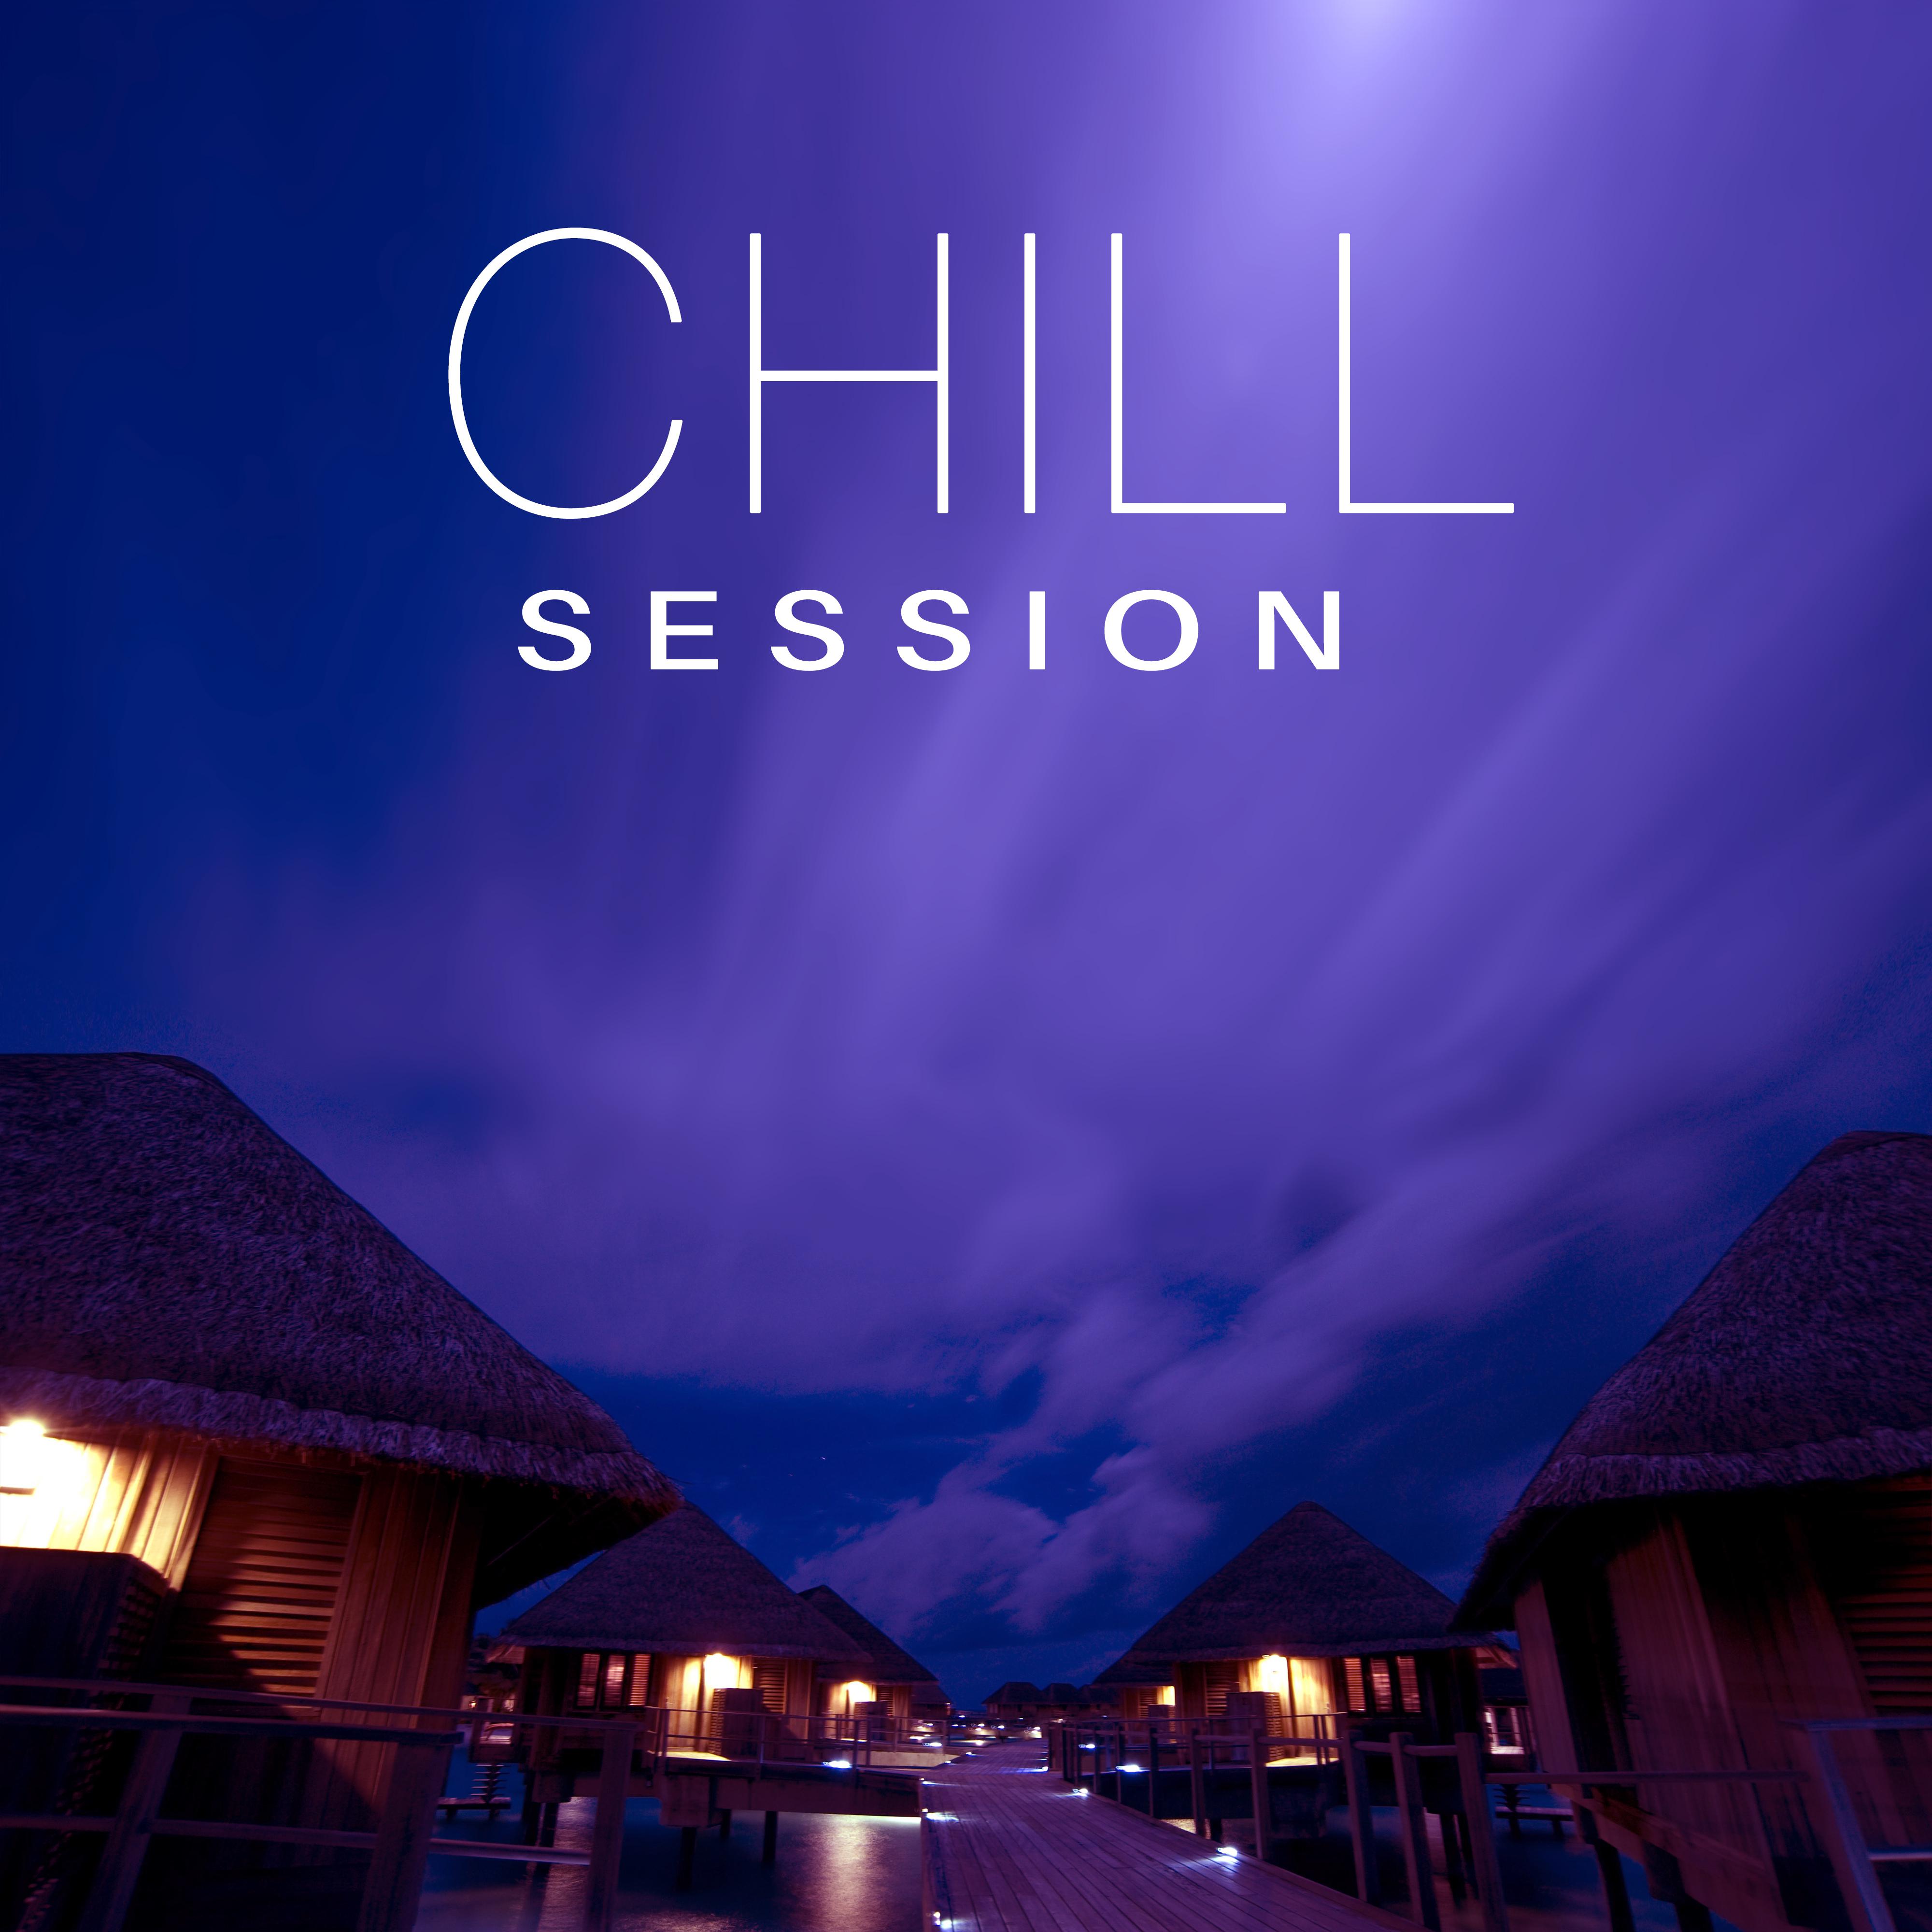 Chill Session  Ibiza Deep Chill, Hot Summer, Party Hits, Hotel Lounge, Beach Chill, Perfect Rest